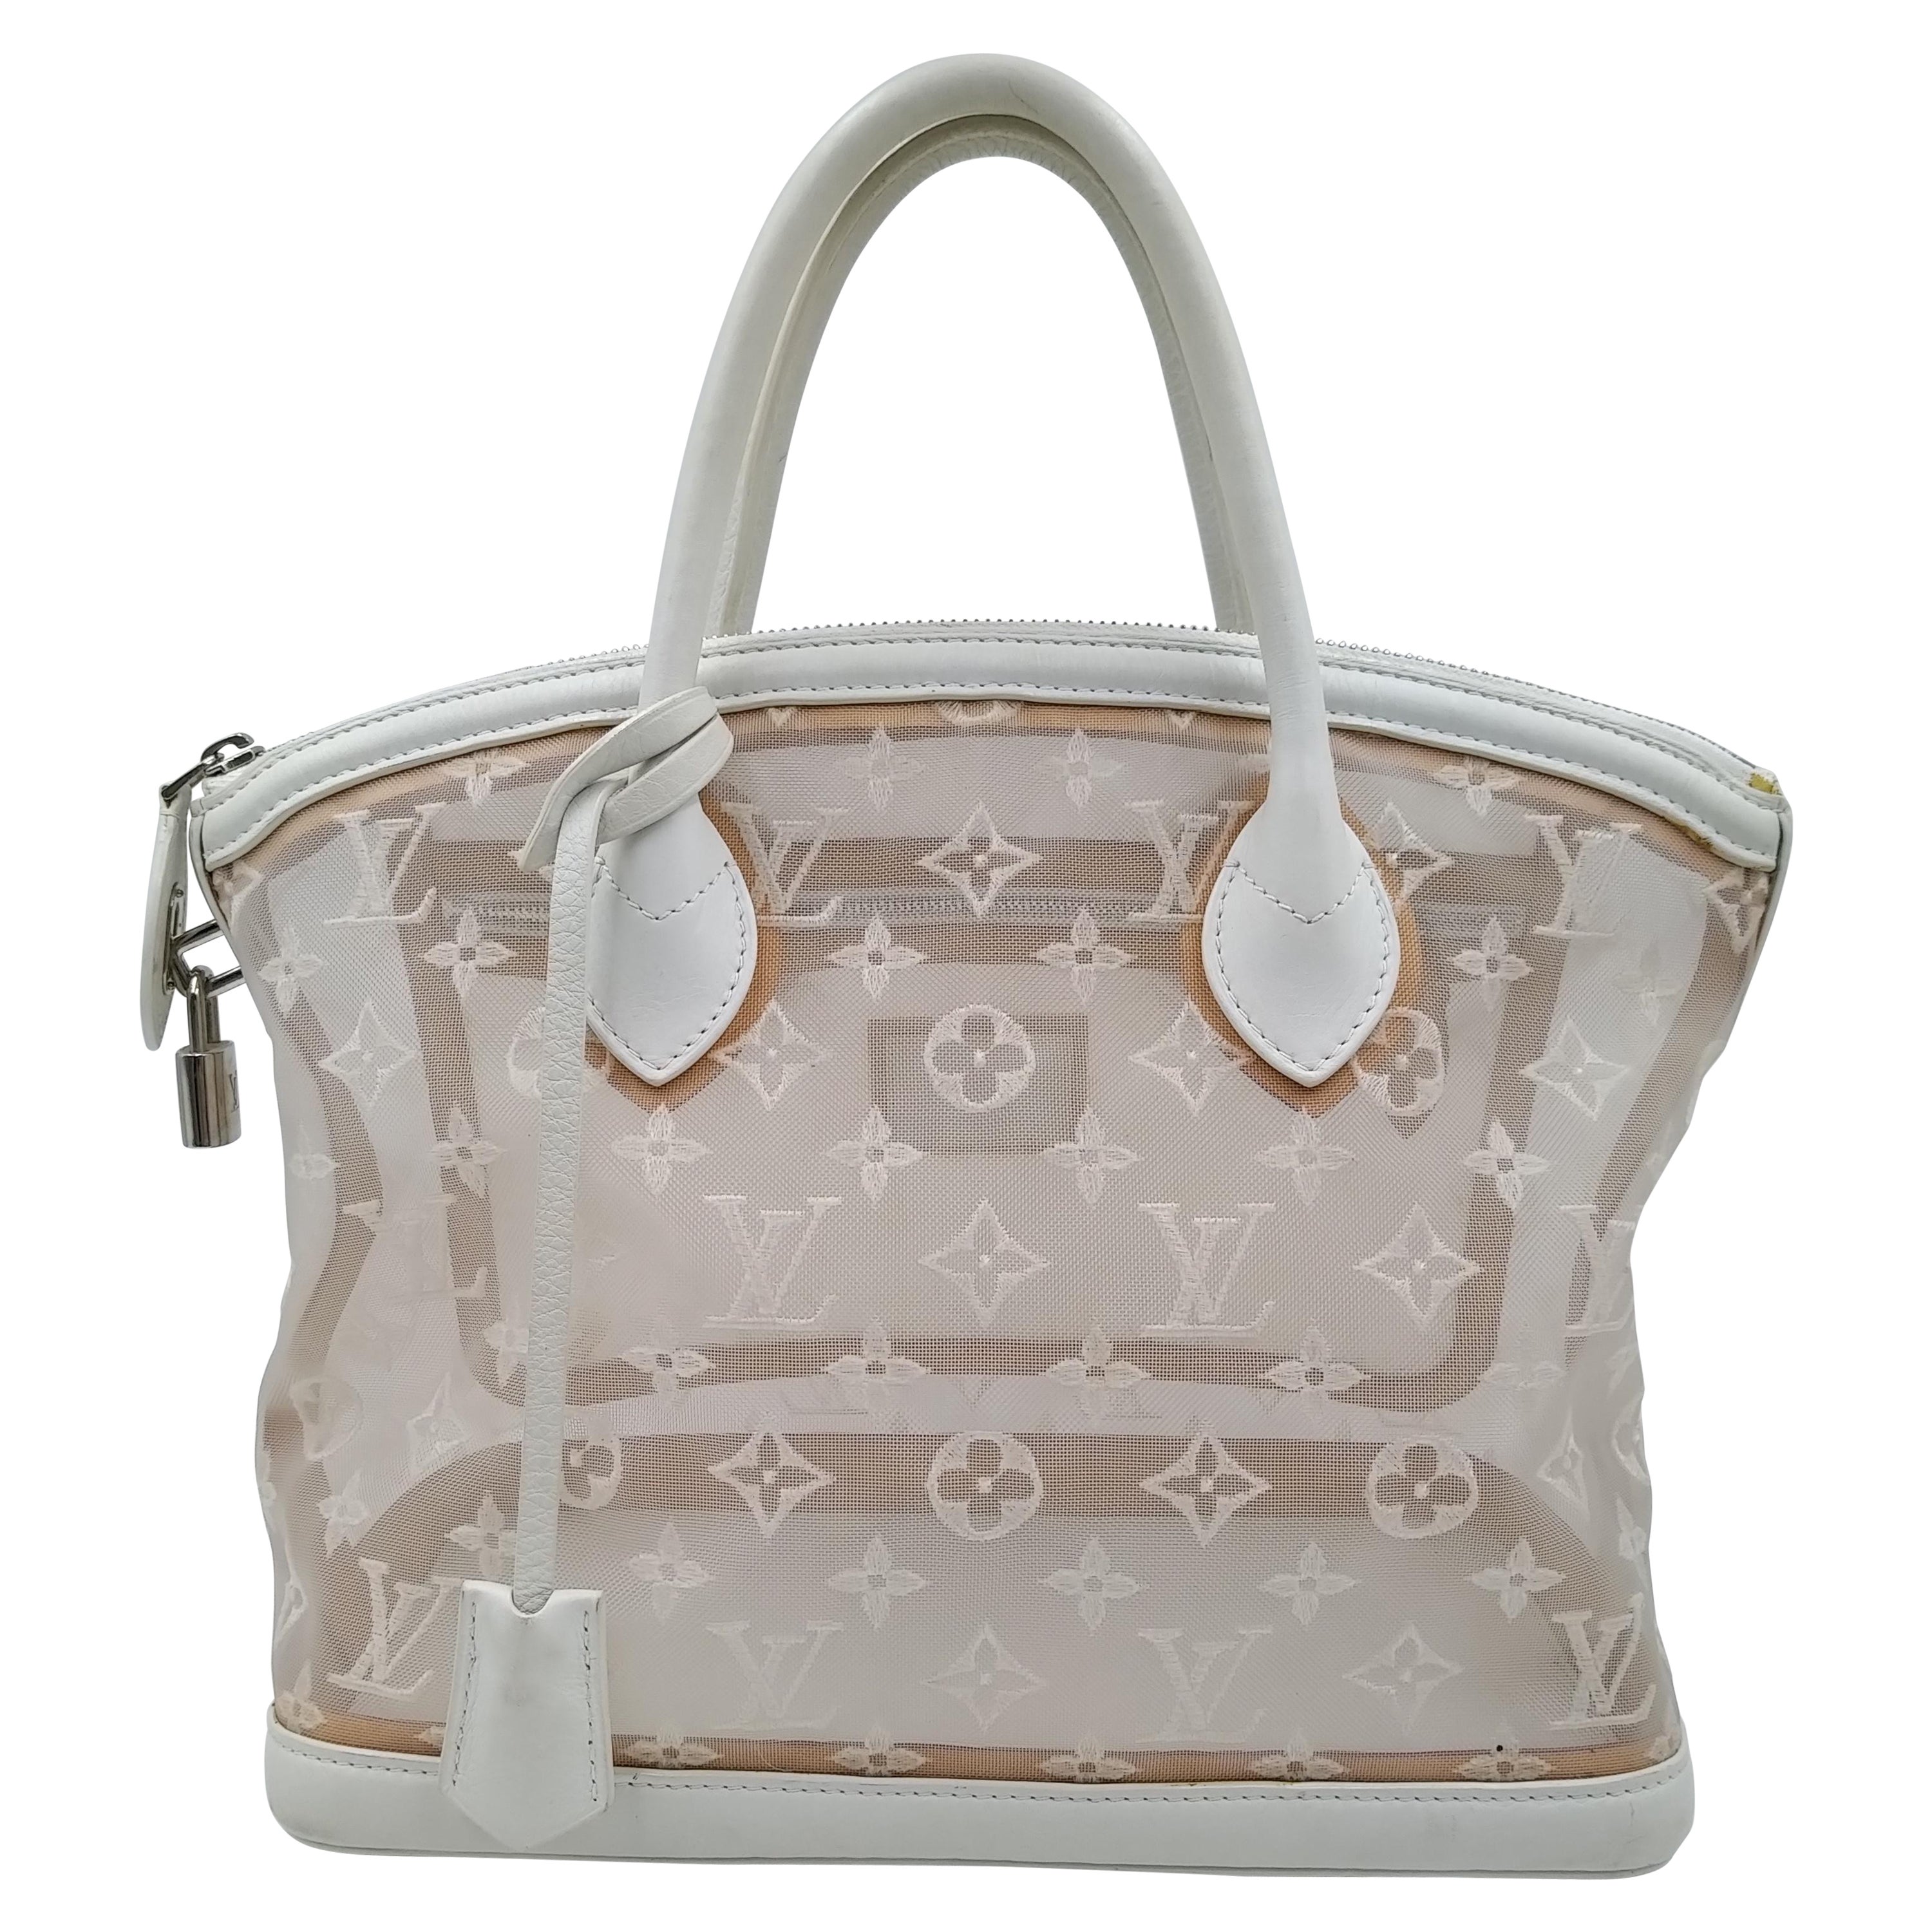 Louis Vuitton Limited Edition Bag - 212 For Sale on 1stDibs